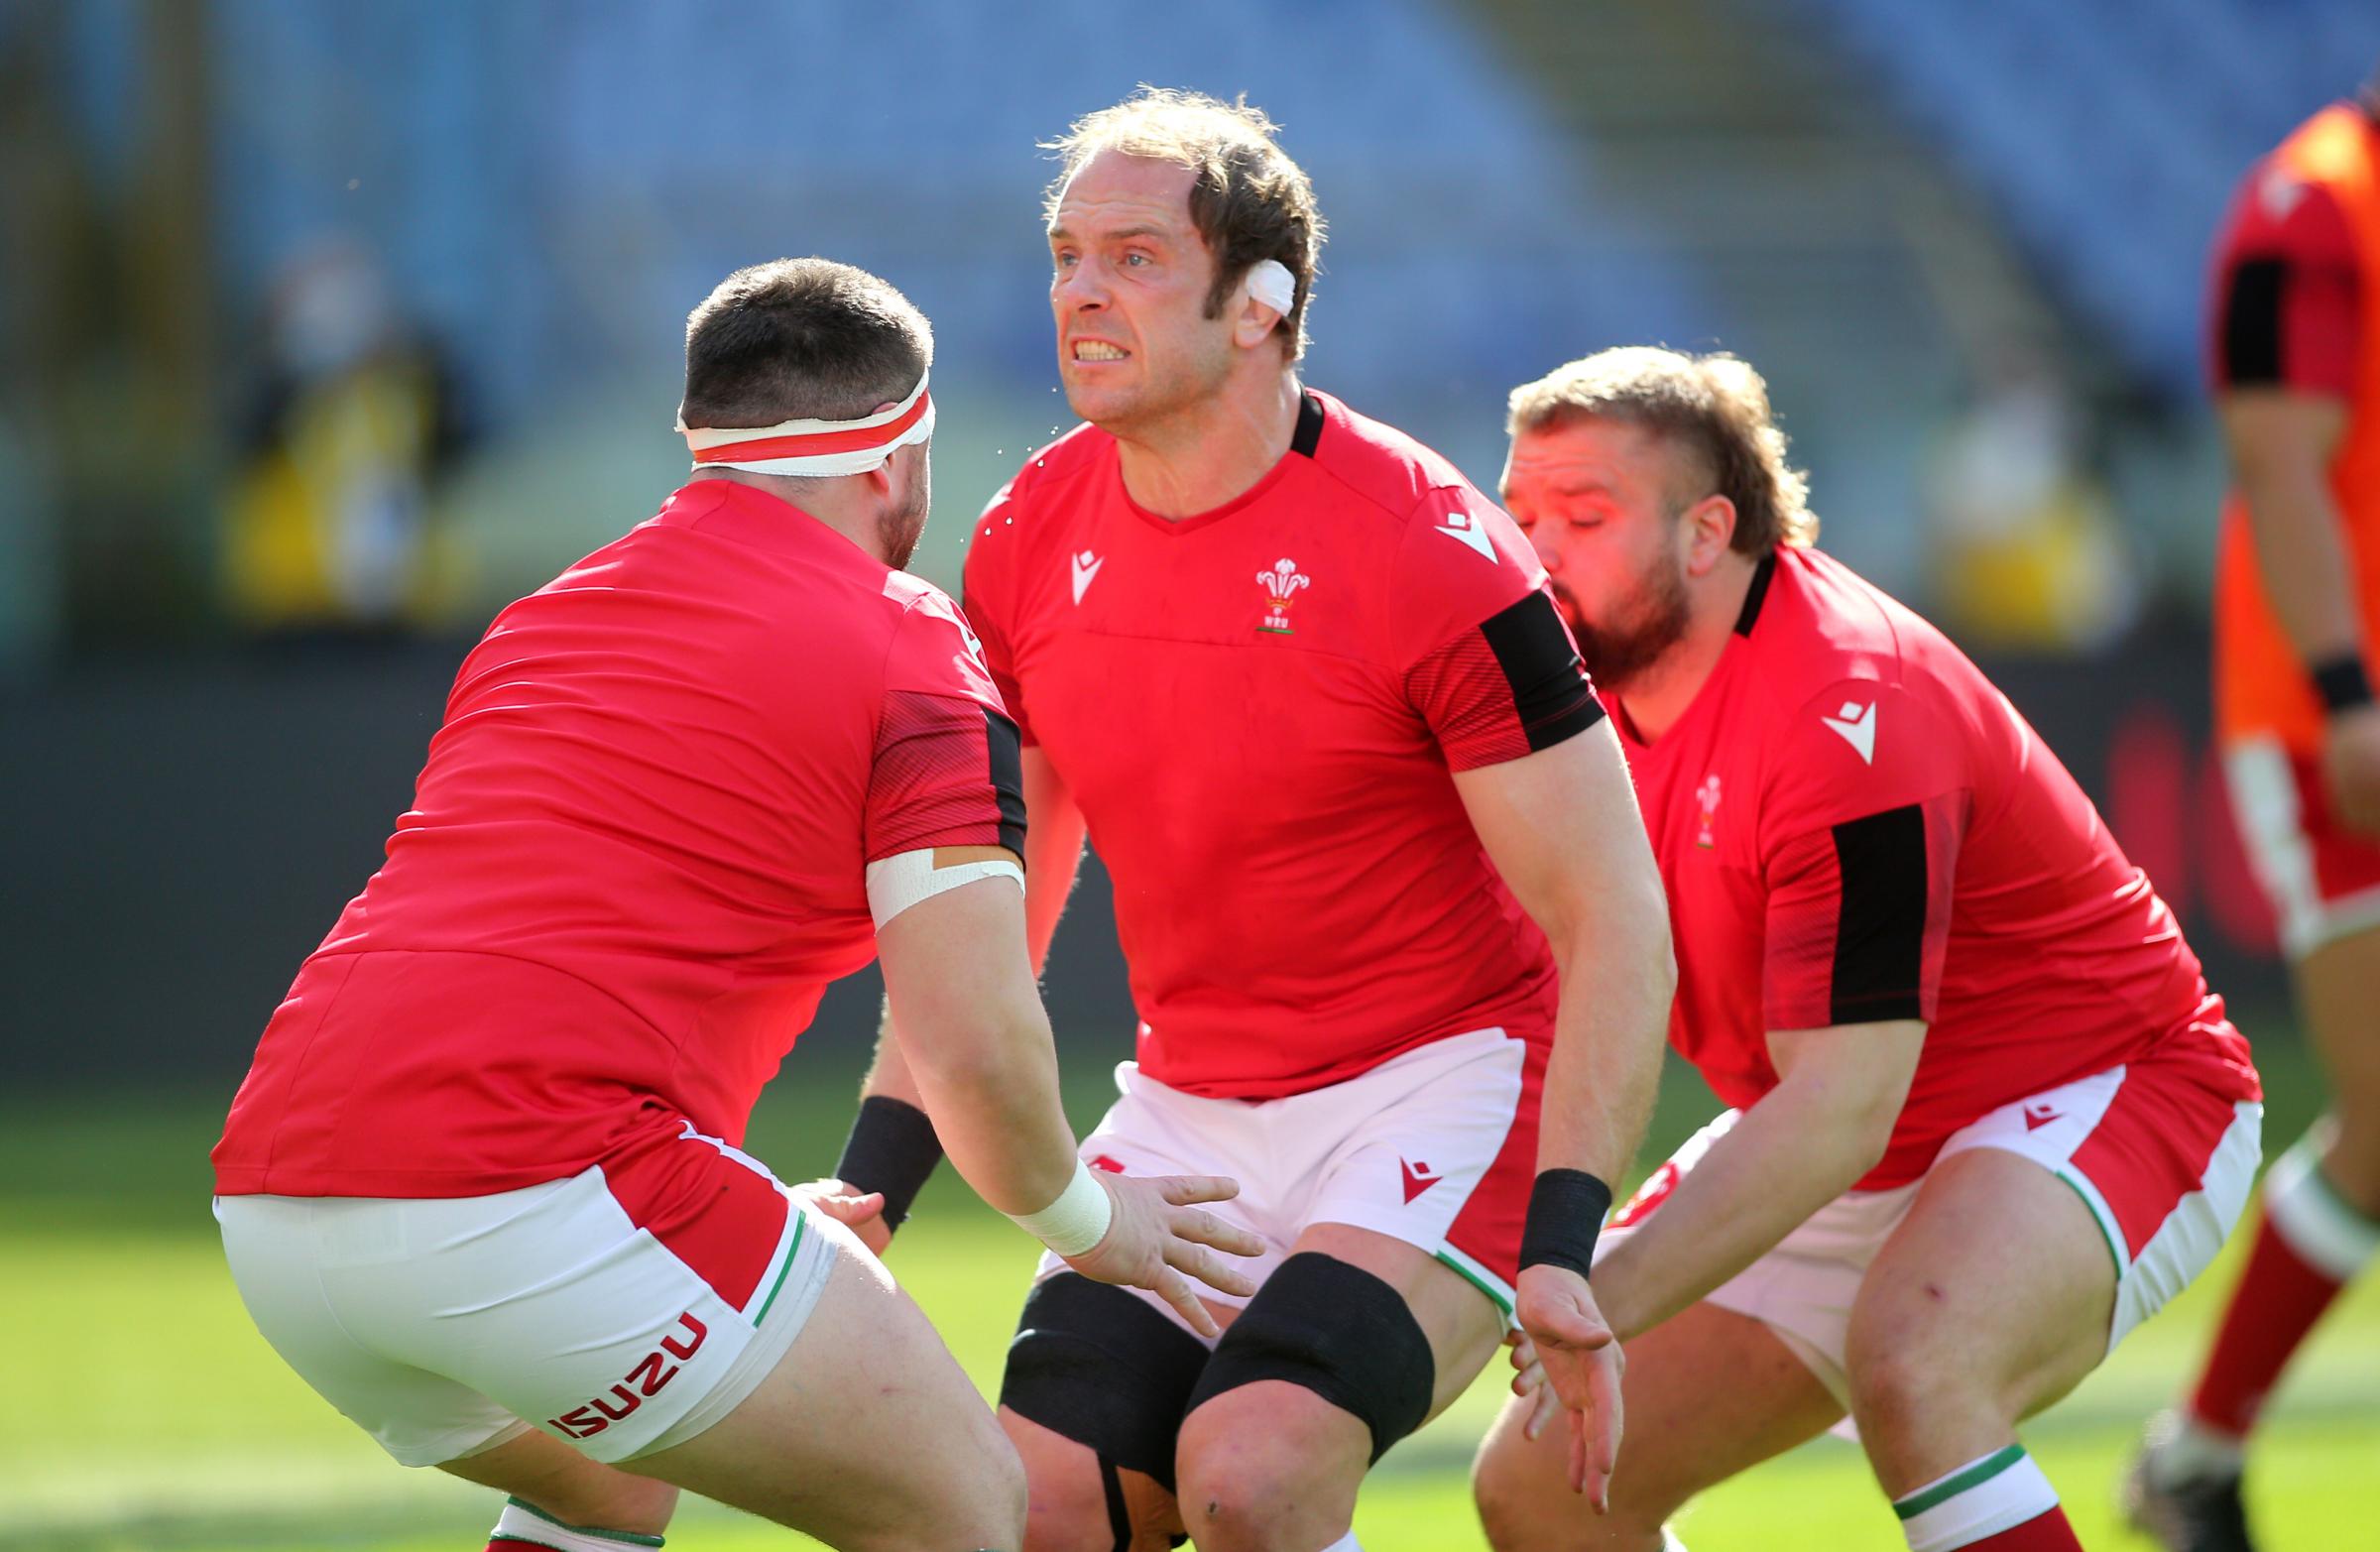 Wales Alun Wyn Jones (centre) during the warm up before the Guinness Six Nations match at Stadio Olimpico, Rome. Picture date: Saturday March 13, 2021.